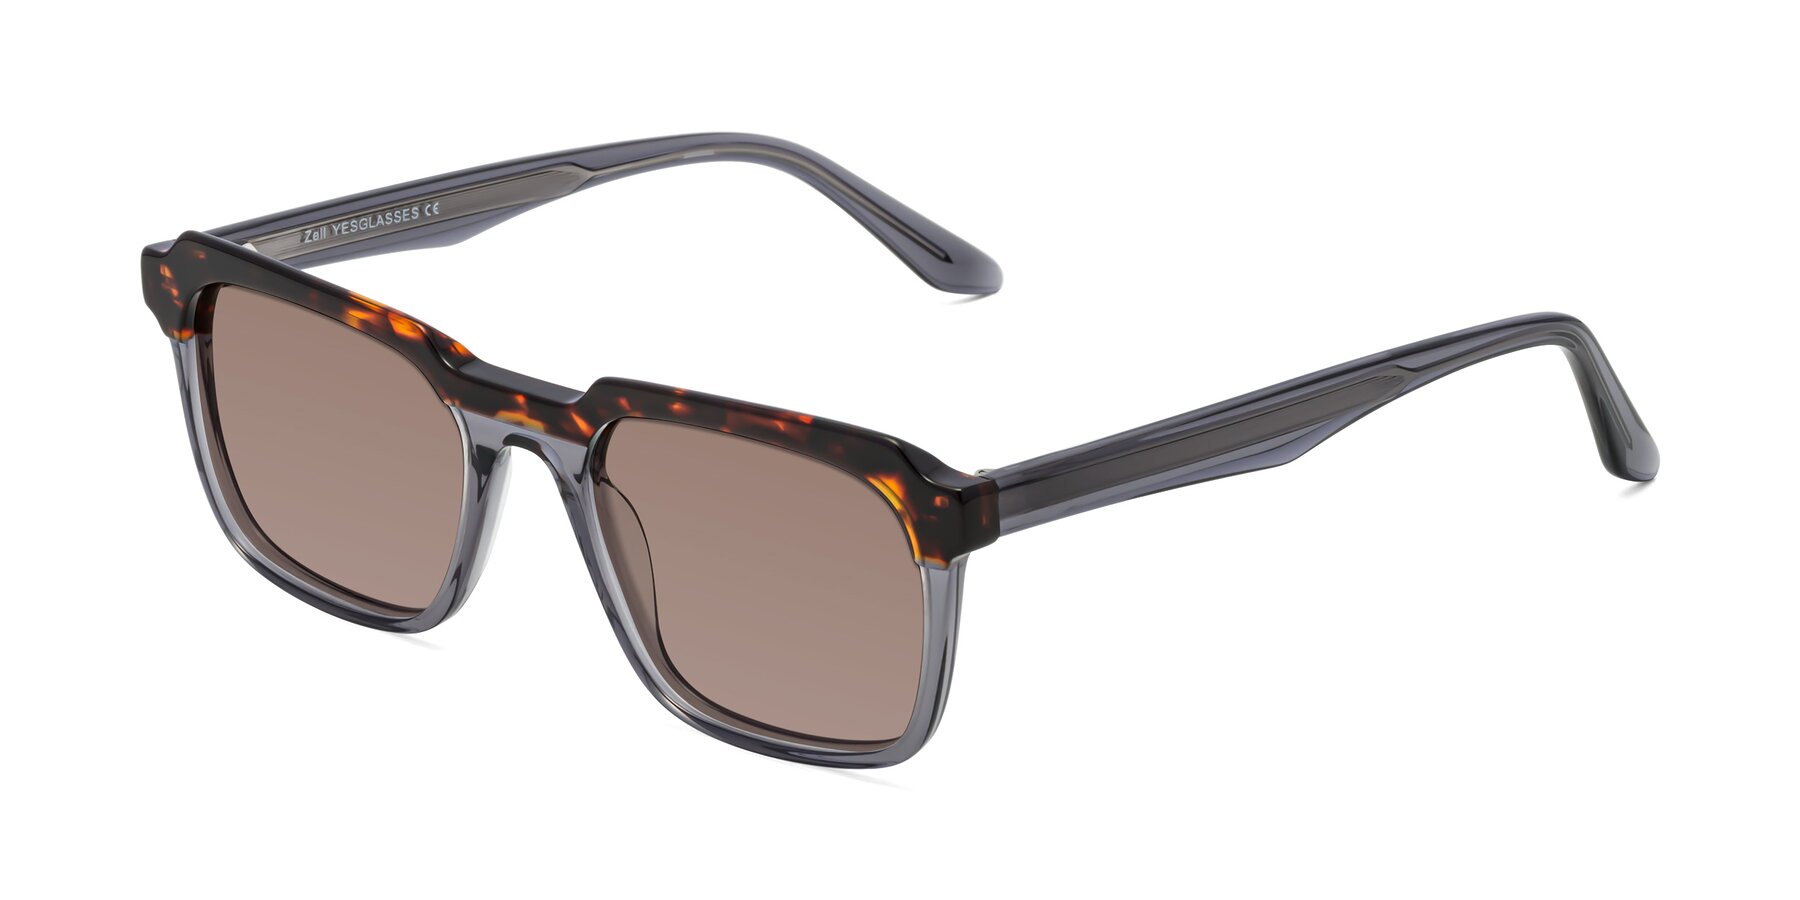 Angle of Zell in Tortoise/Gray with Medium Brown Tinted Lenses